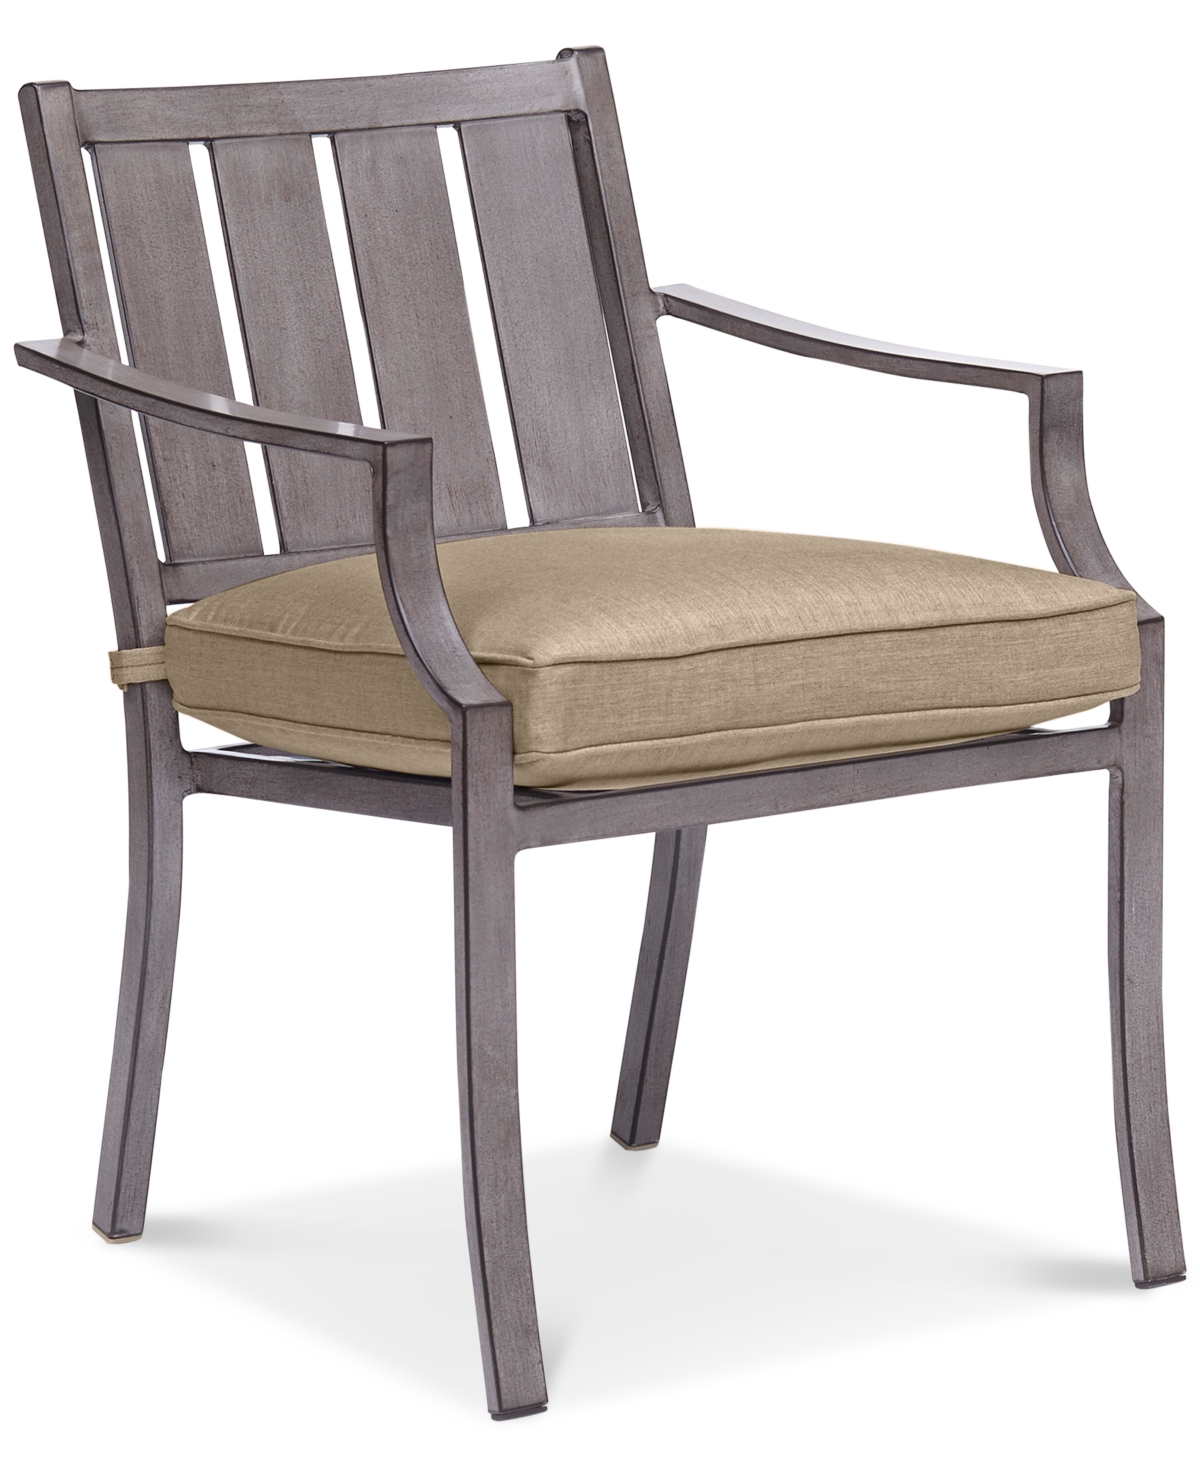 Agio Wayland Outdoor Dining Chair, Created For Macy's In Outdura Remy Pebble